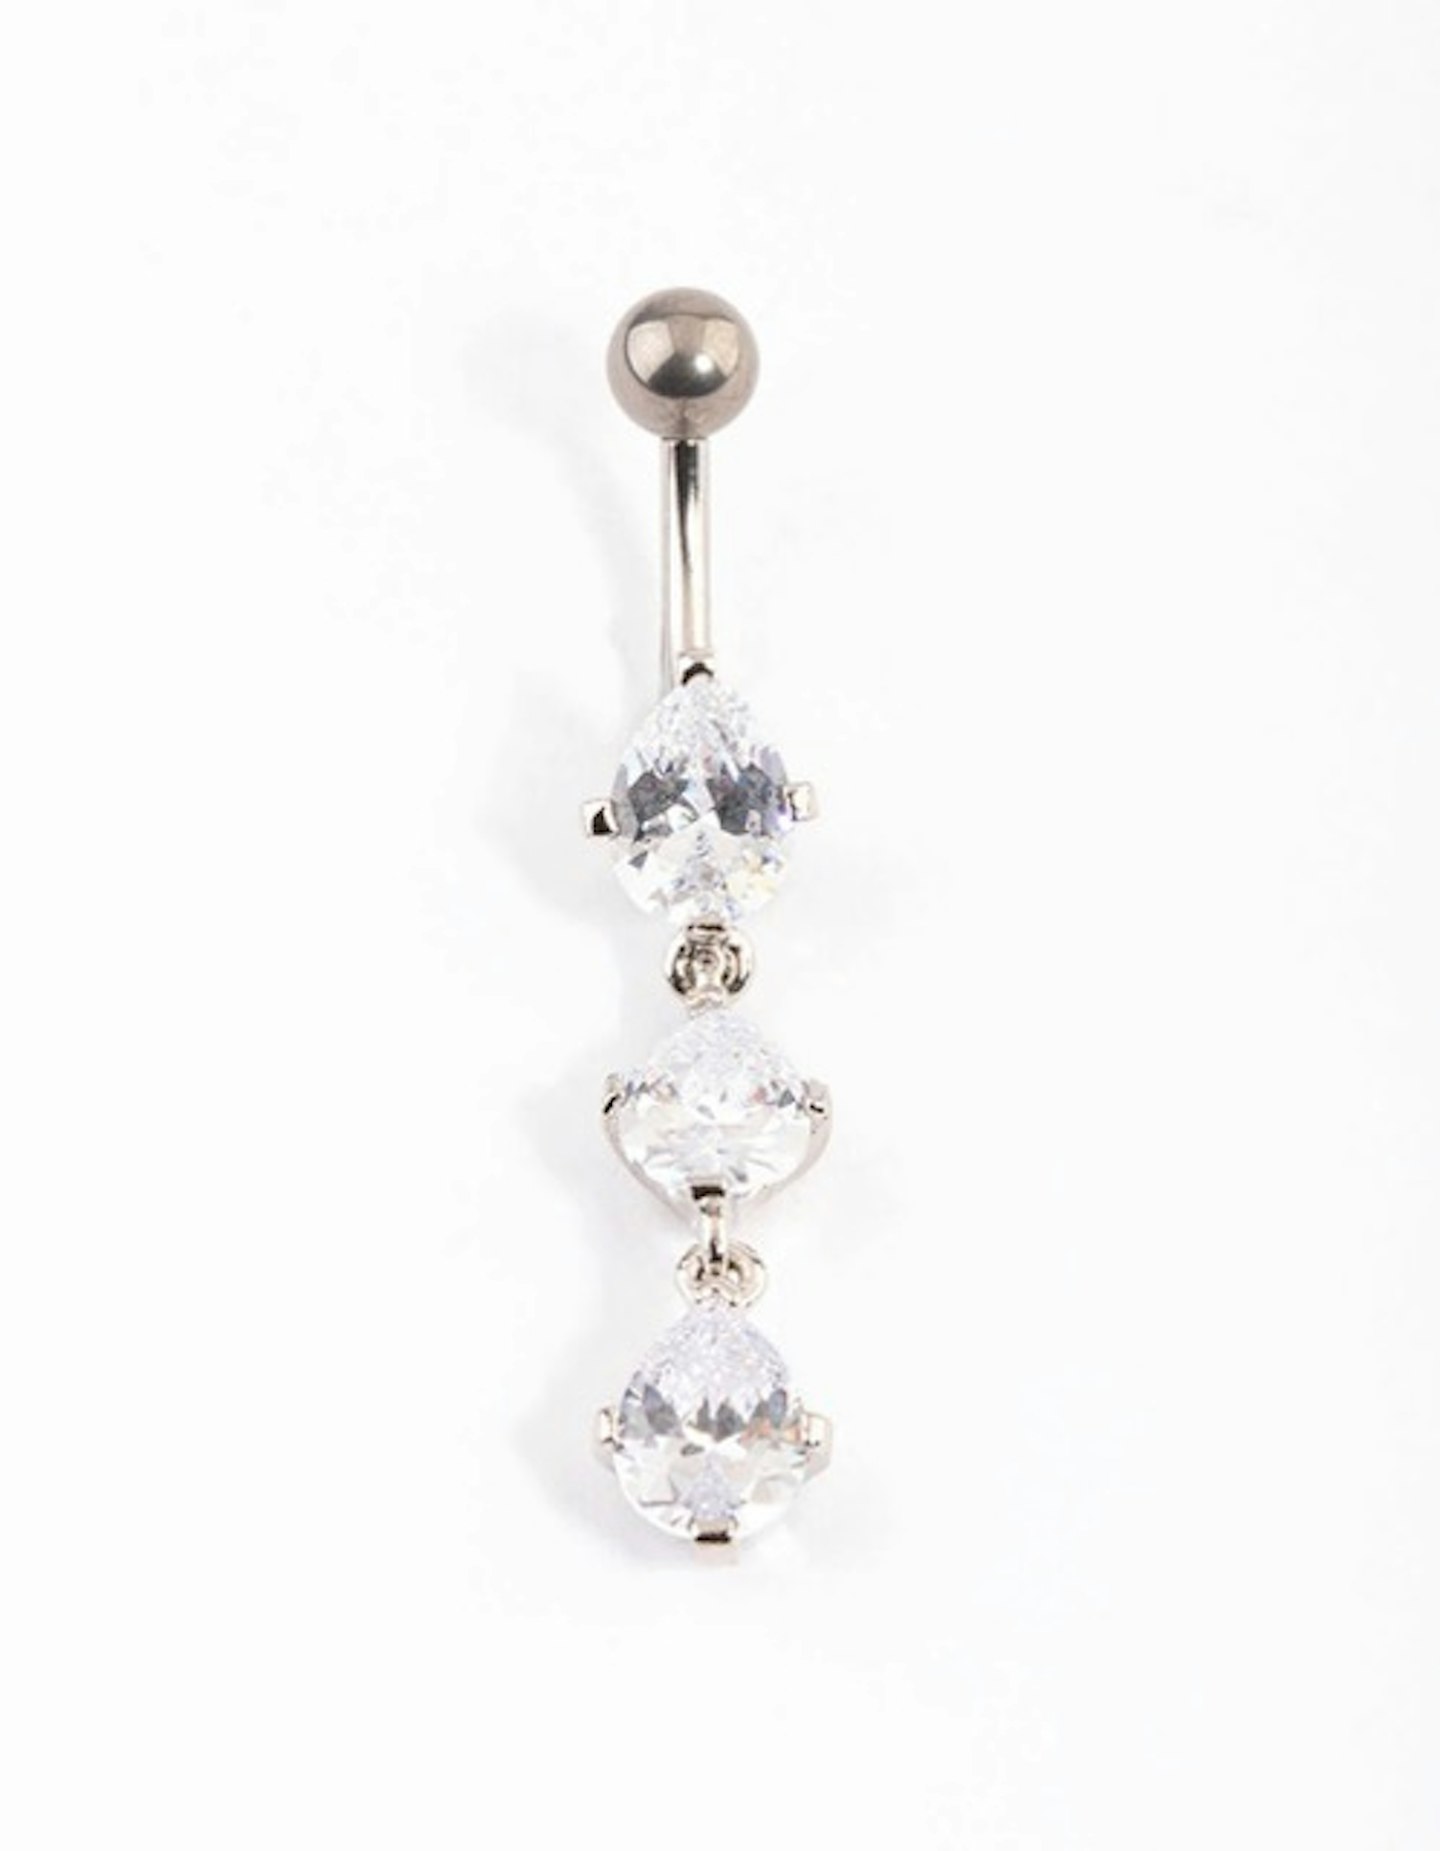 Chanel Belly Button Ring  Belly button piercing jewelry, Belly